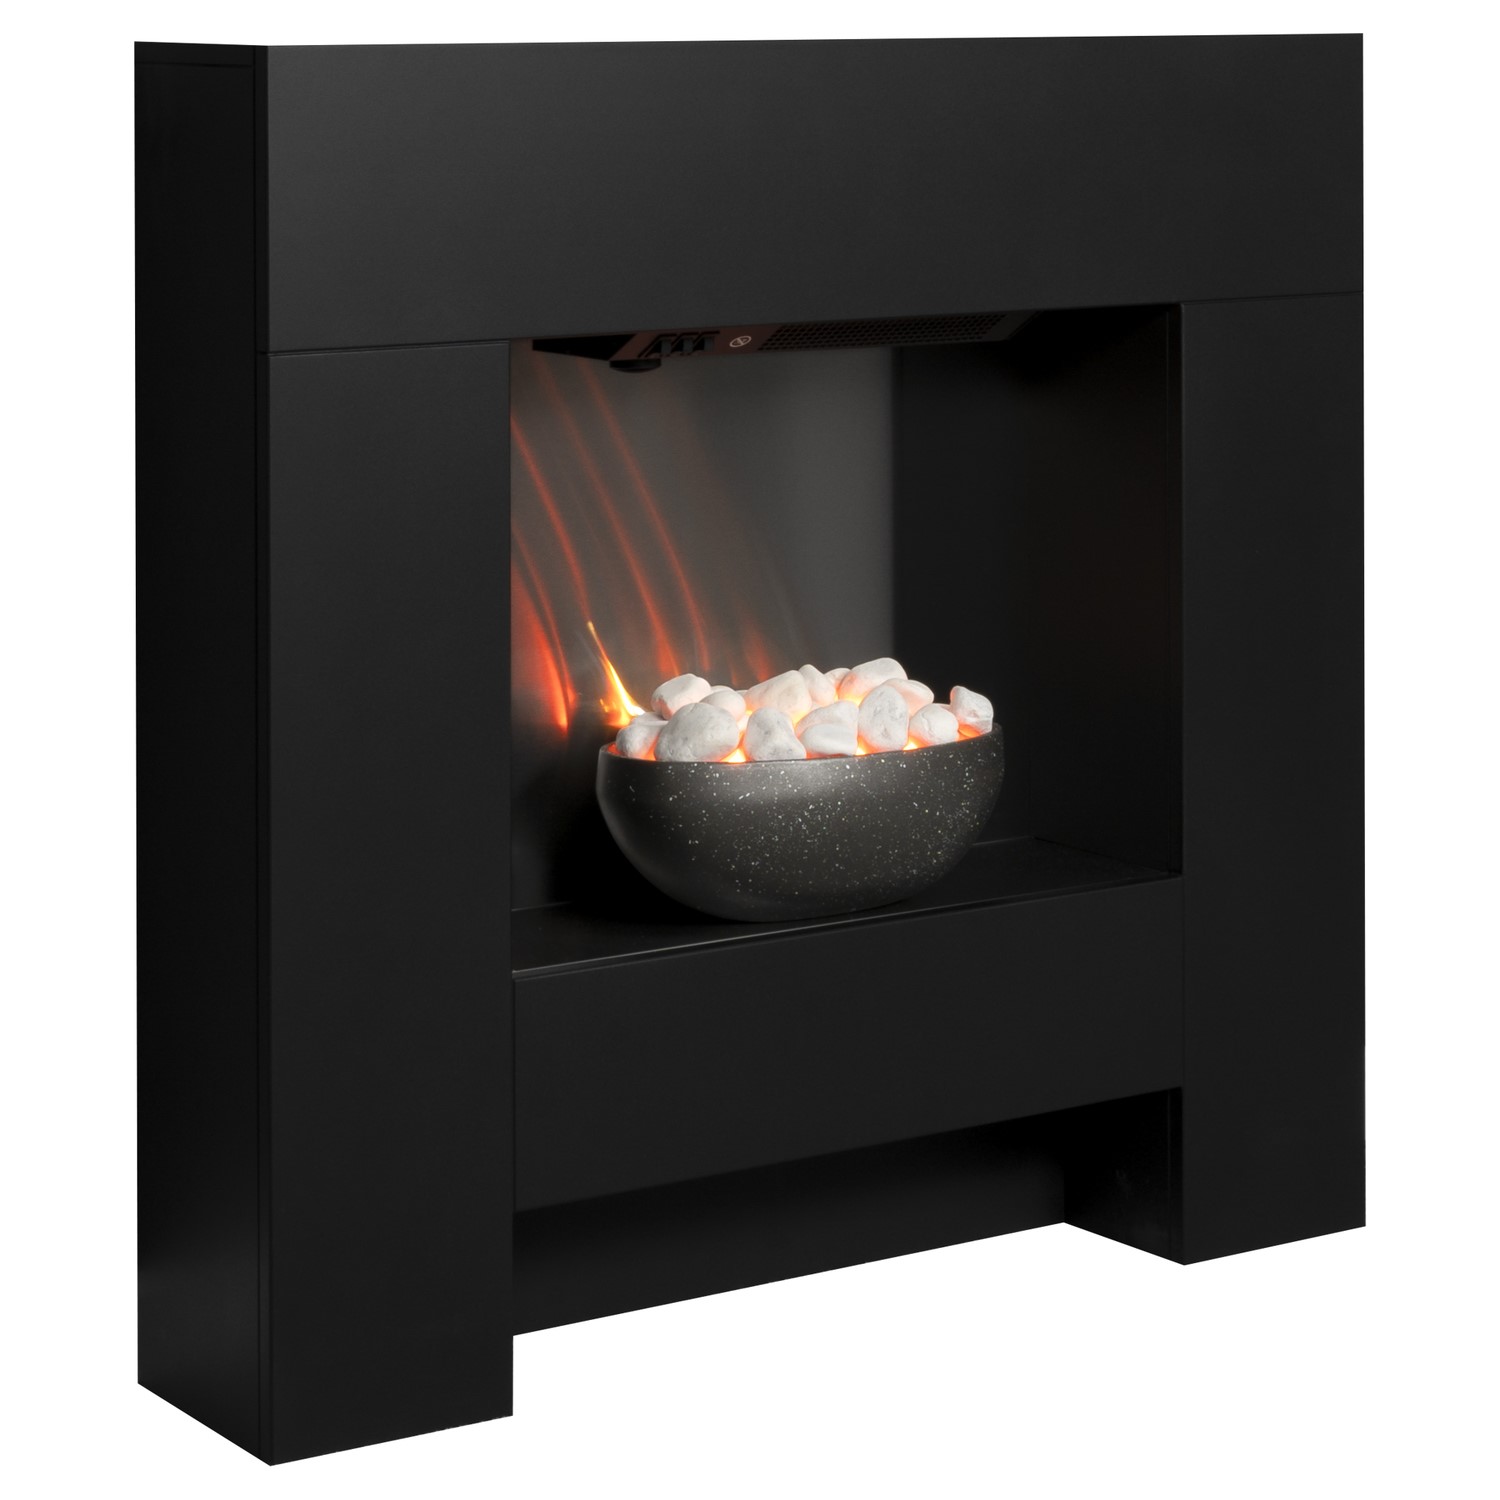 Read more about Adam electric fireplace suite in textured black 36 cubist